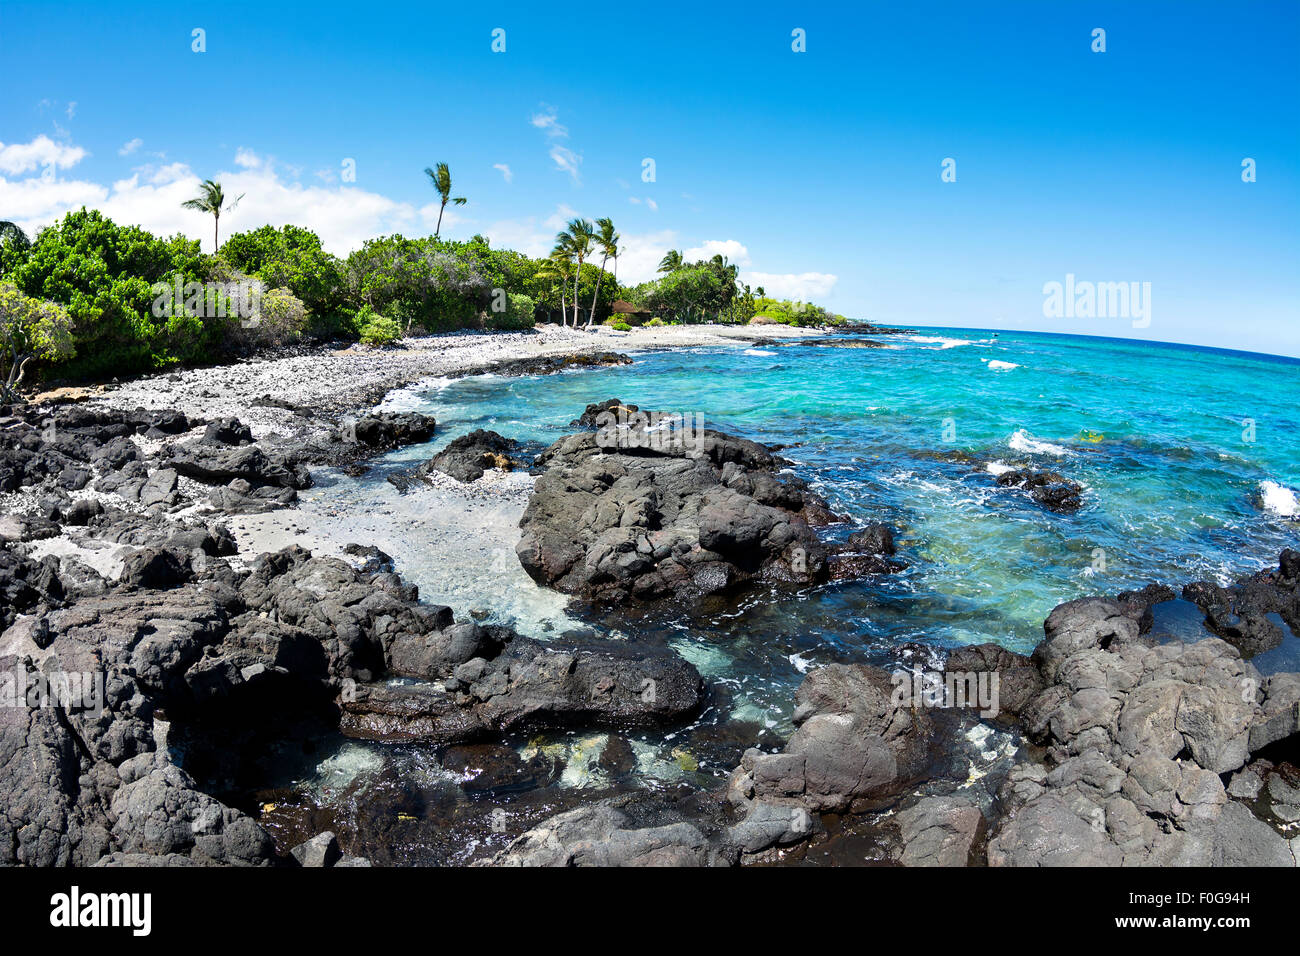 A beautiful black and white gravel beach with clear blue water on a remote beach in Kona Hawaii. Stock Photo